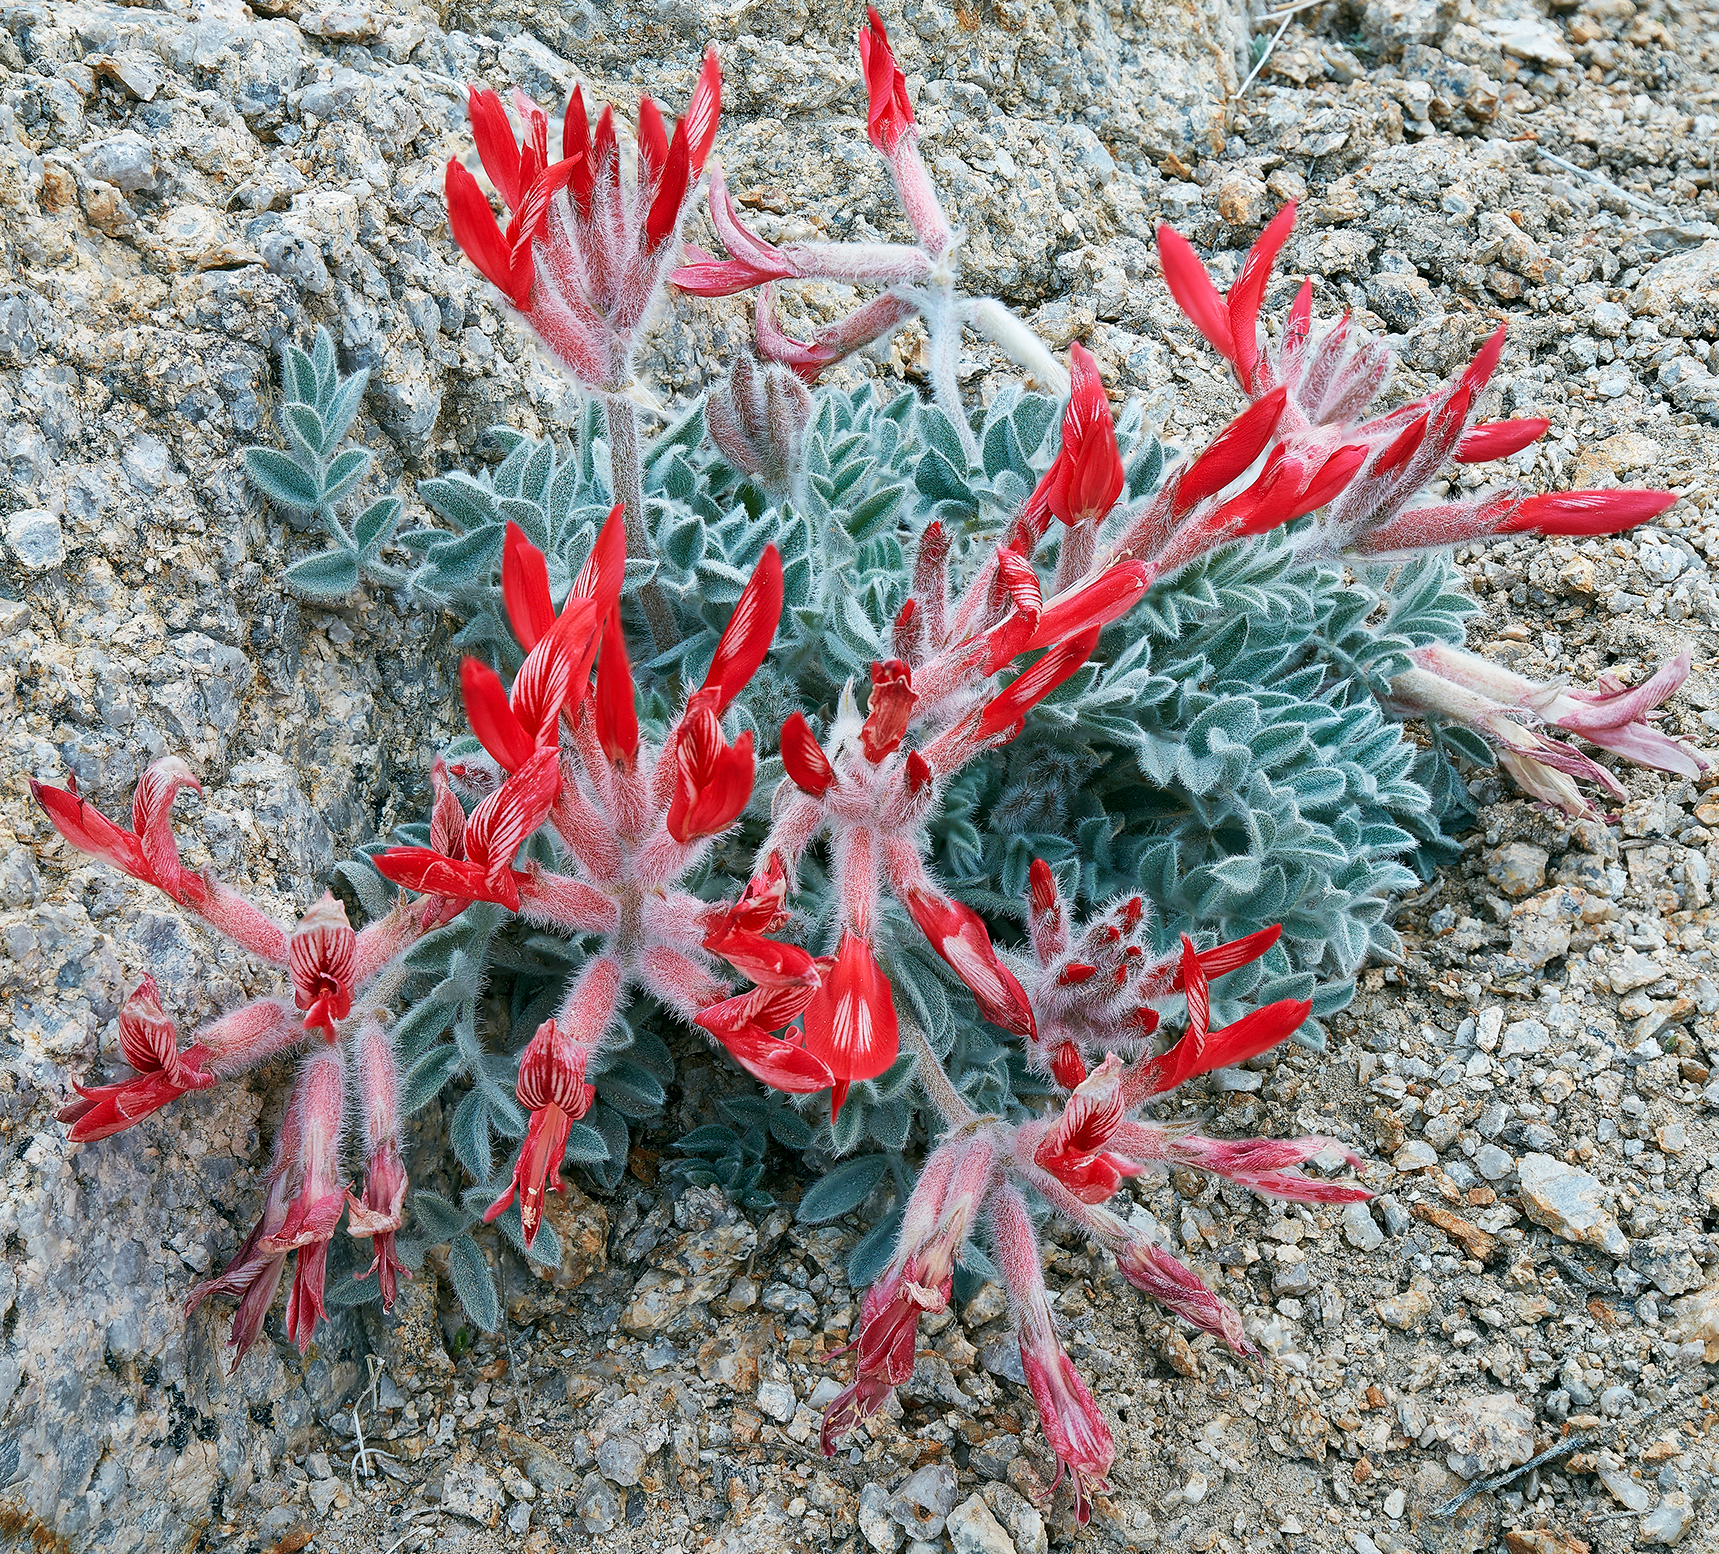 photo showing a Red and green leafed  vegetation growing in the Alabama Hills